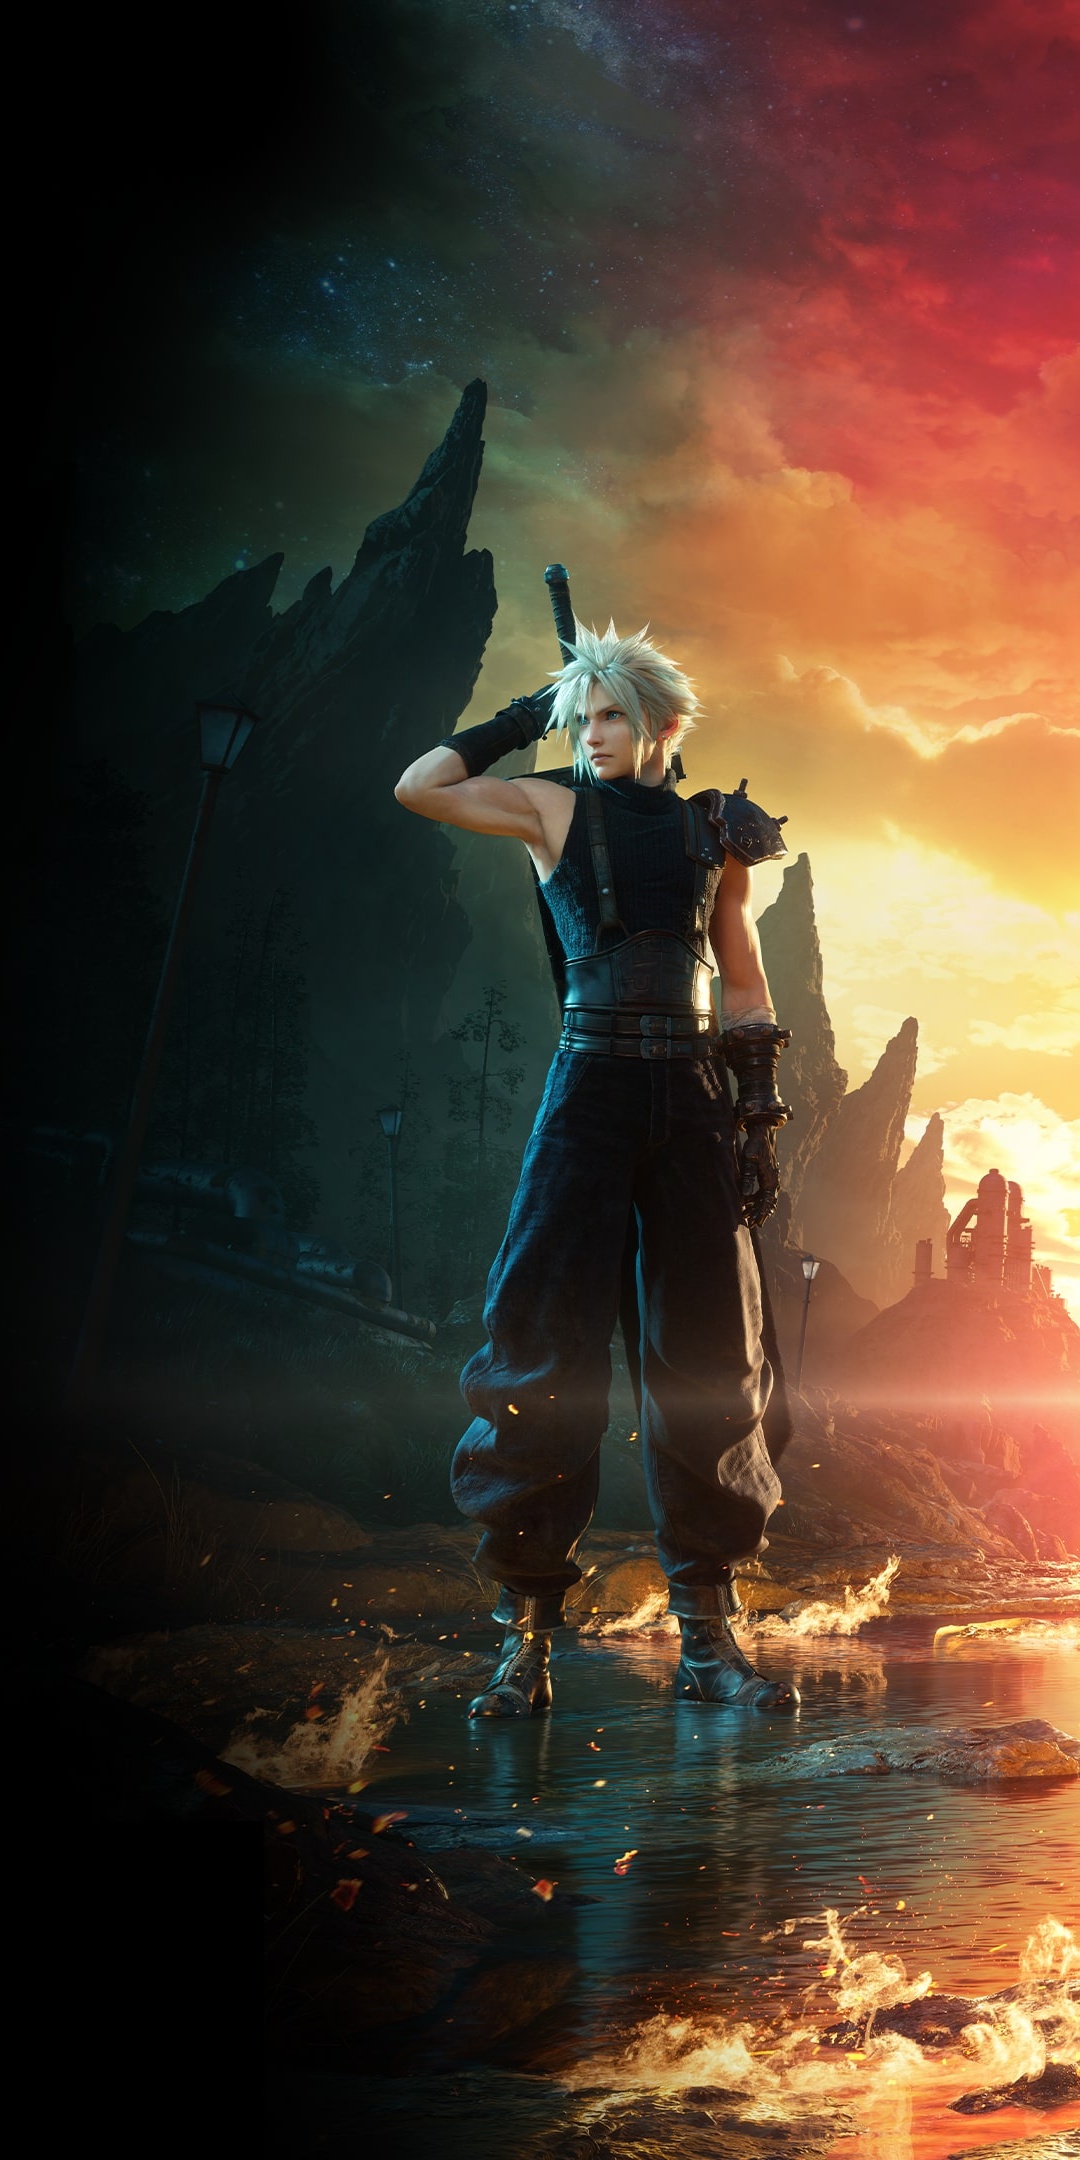 Download the Zack Fair wallpaper from our website! - Square Enix